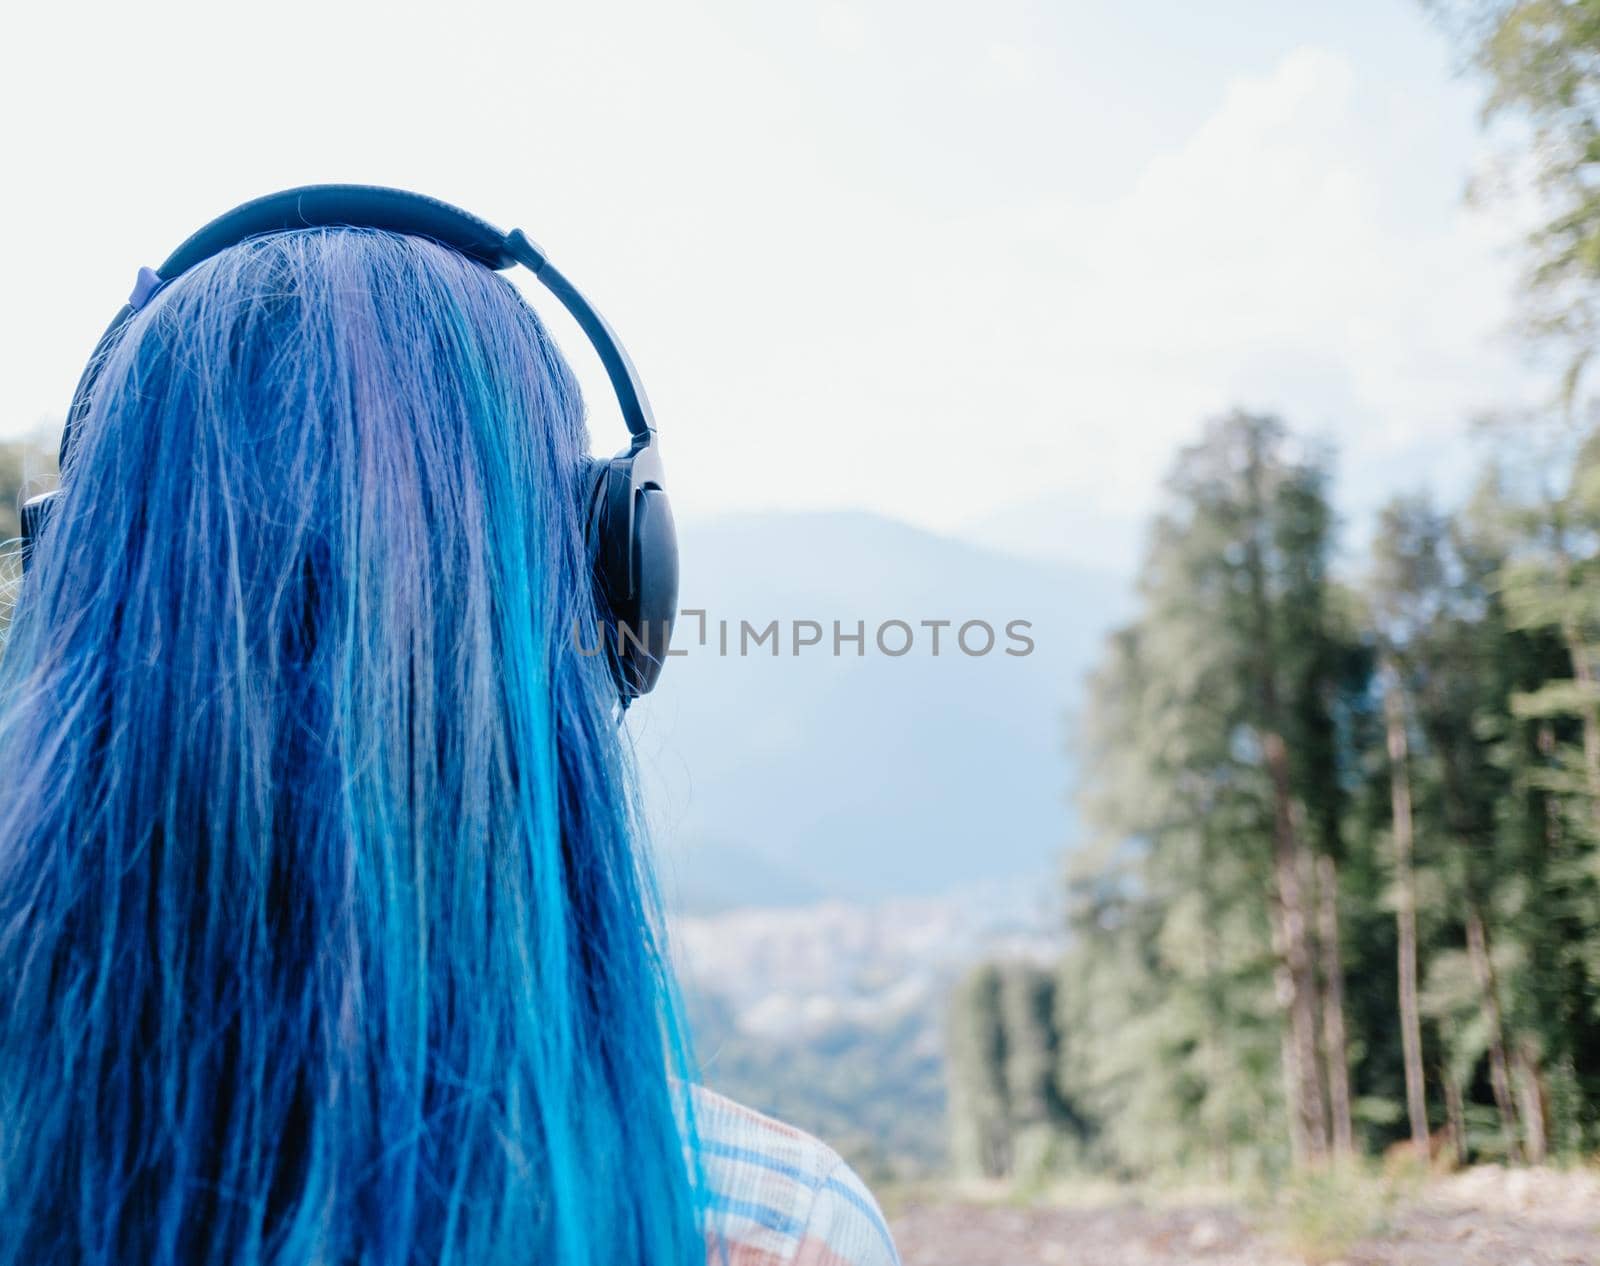 Girl with blue hair in headphones looking at summer landscape, rear view.